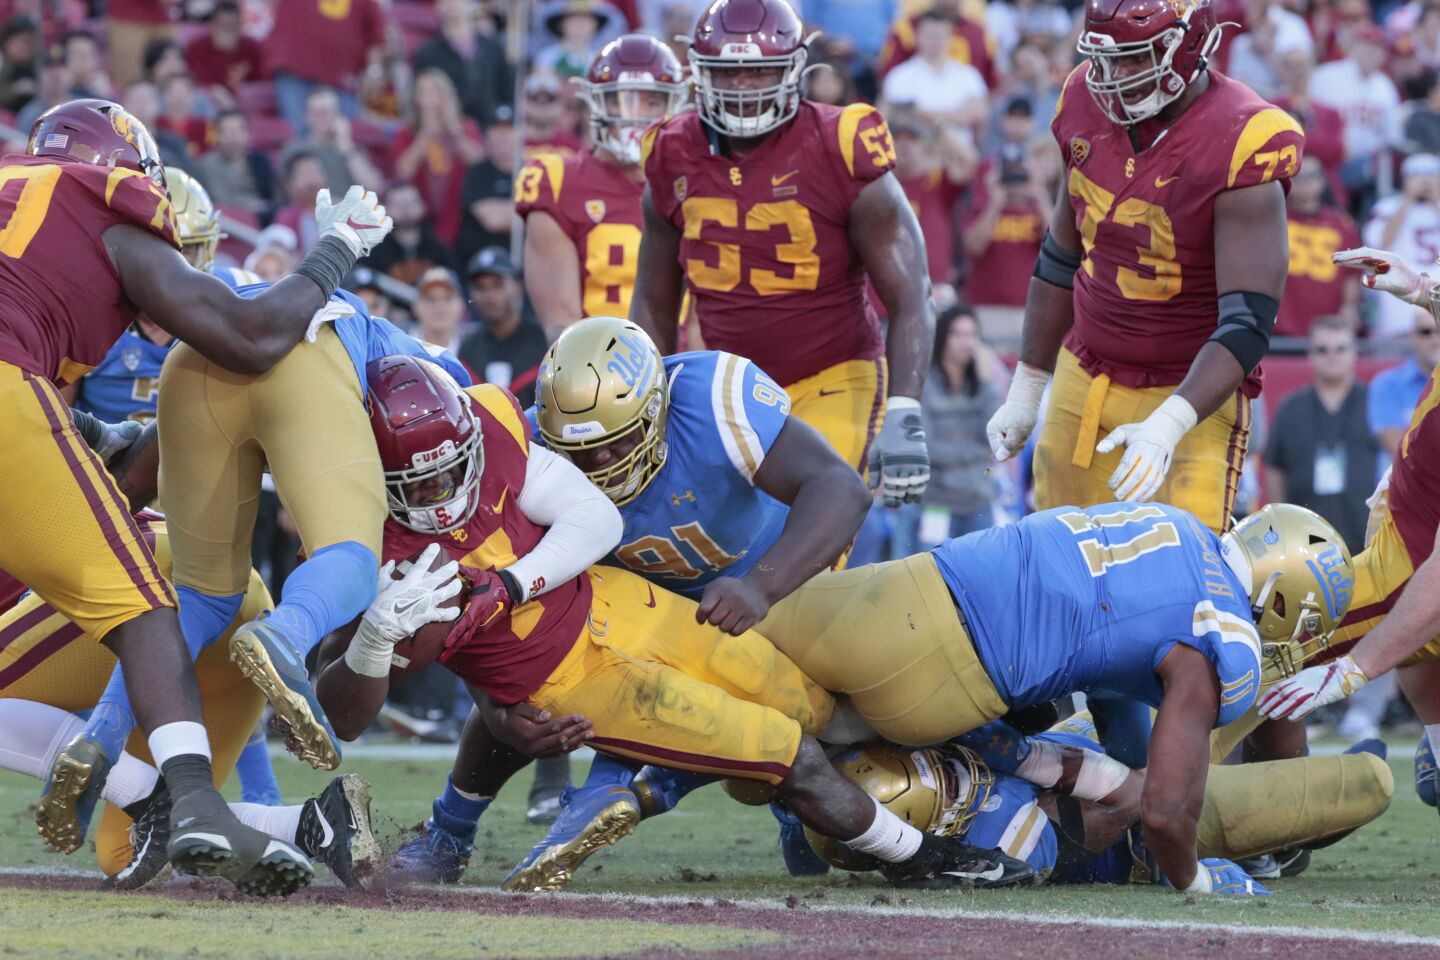 USC running back Stephen Carr (7) scores a touchdown on a short run late in the fourth quarter against UCLA at the Coliseum on Saturday.